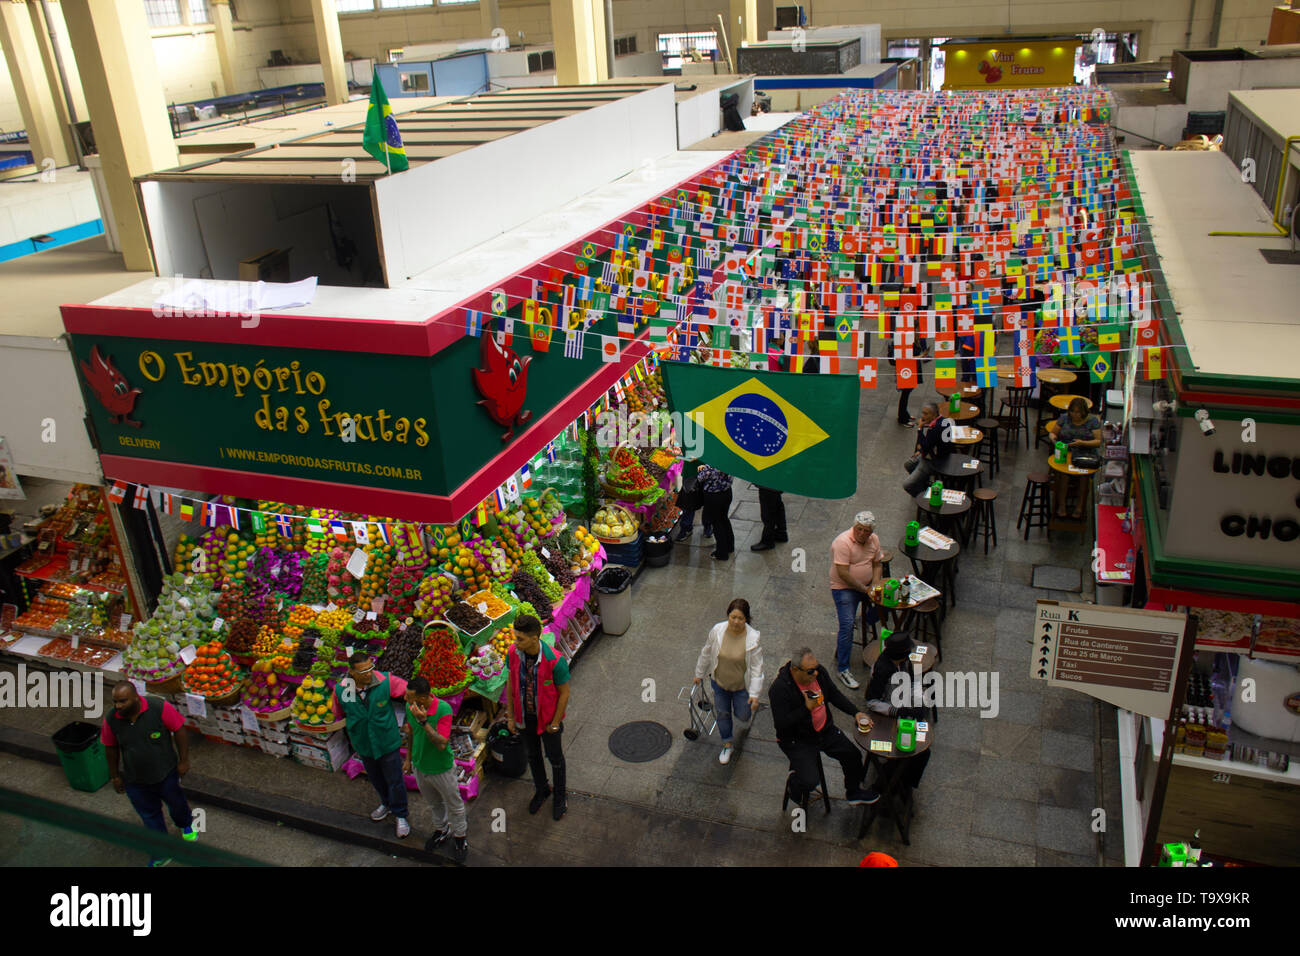 Country flags decorate the row of snack stops at the Municipal Market, Sao Paulo, Brazil Stock Photo